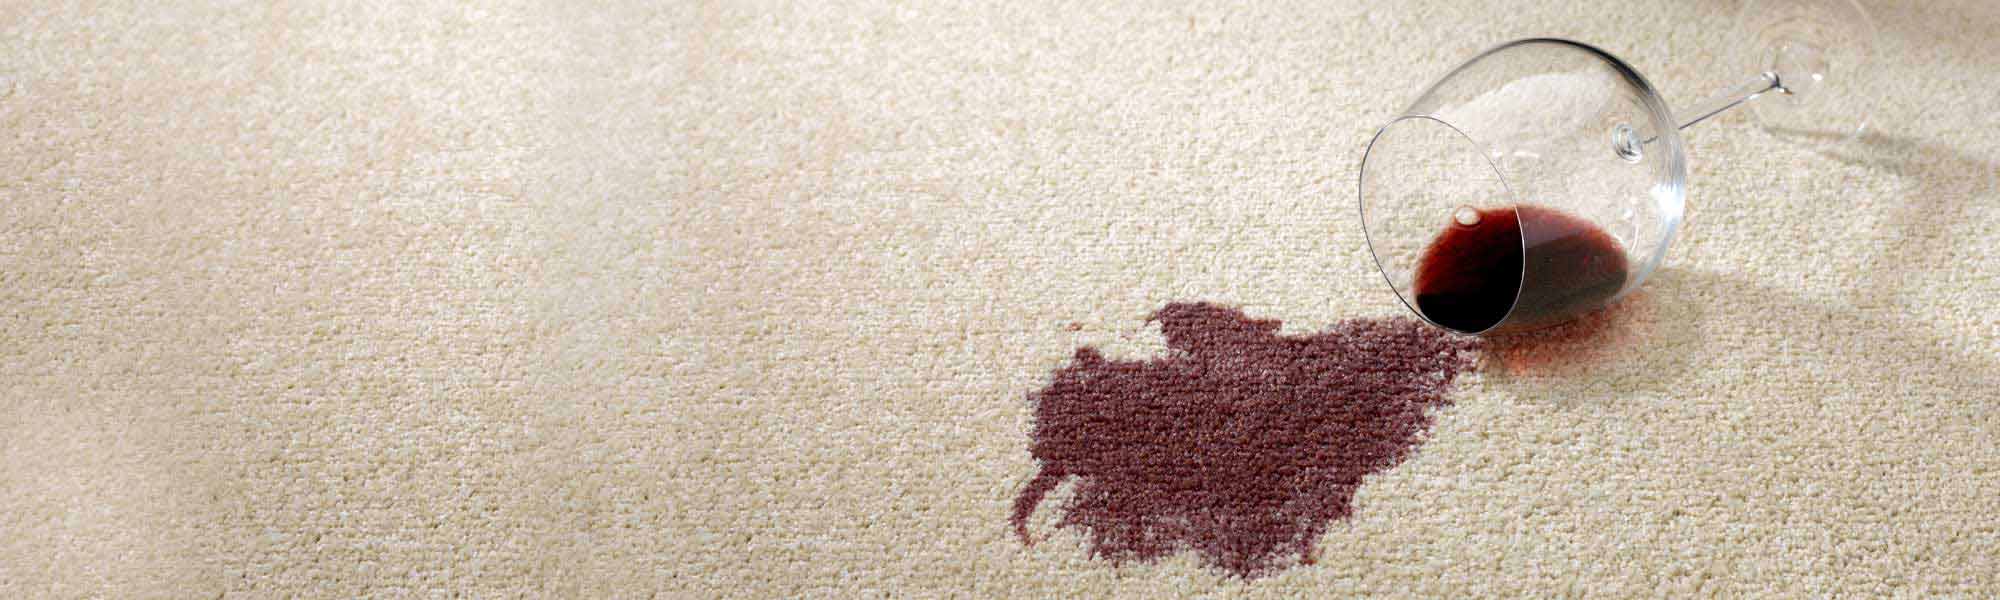 Professional Stain Removal Service by Power Chem-Dry